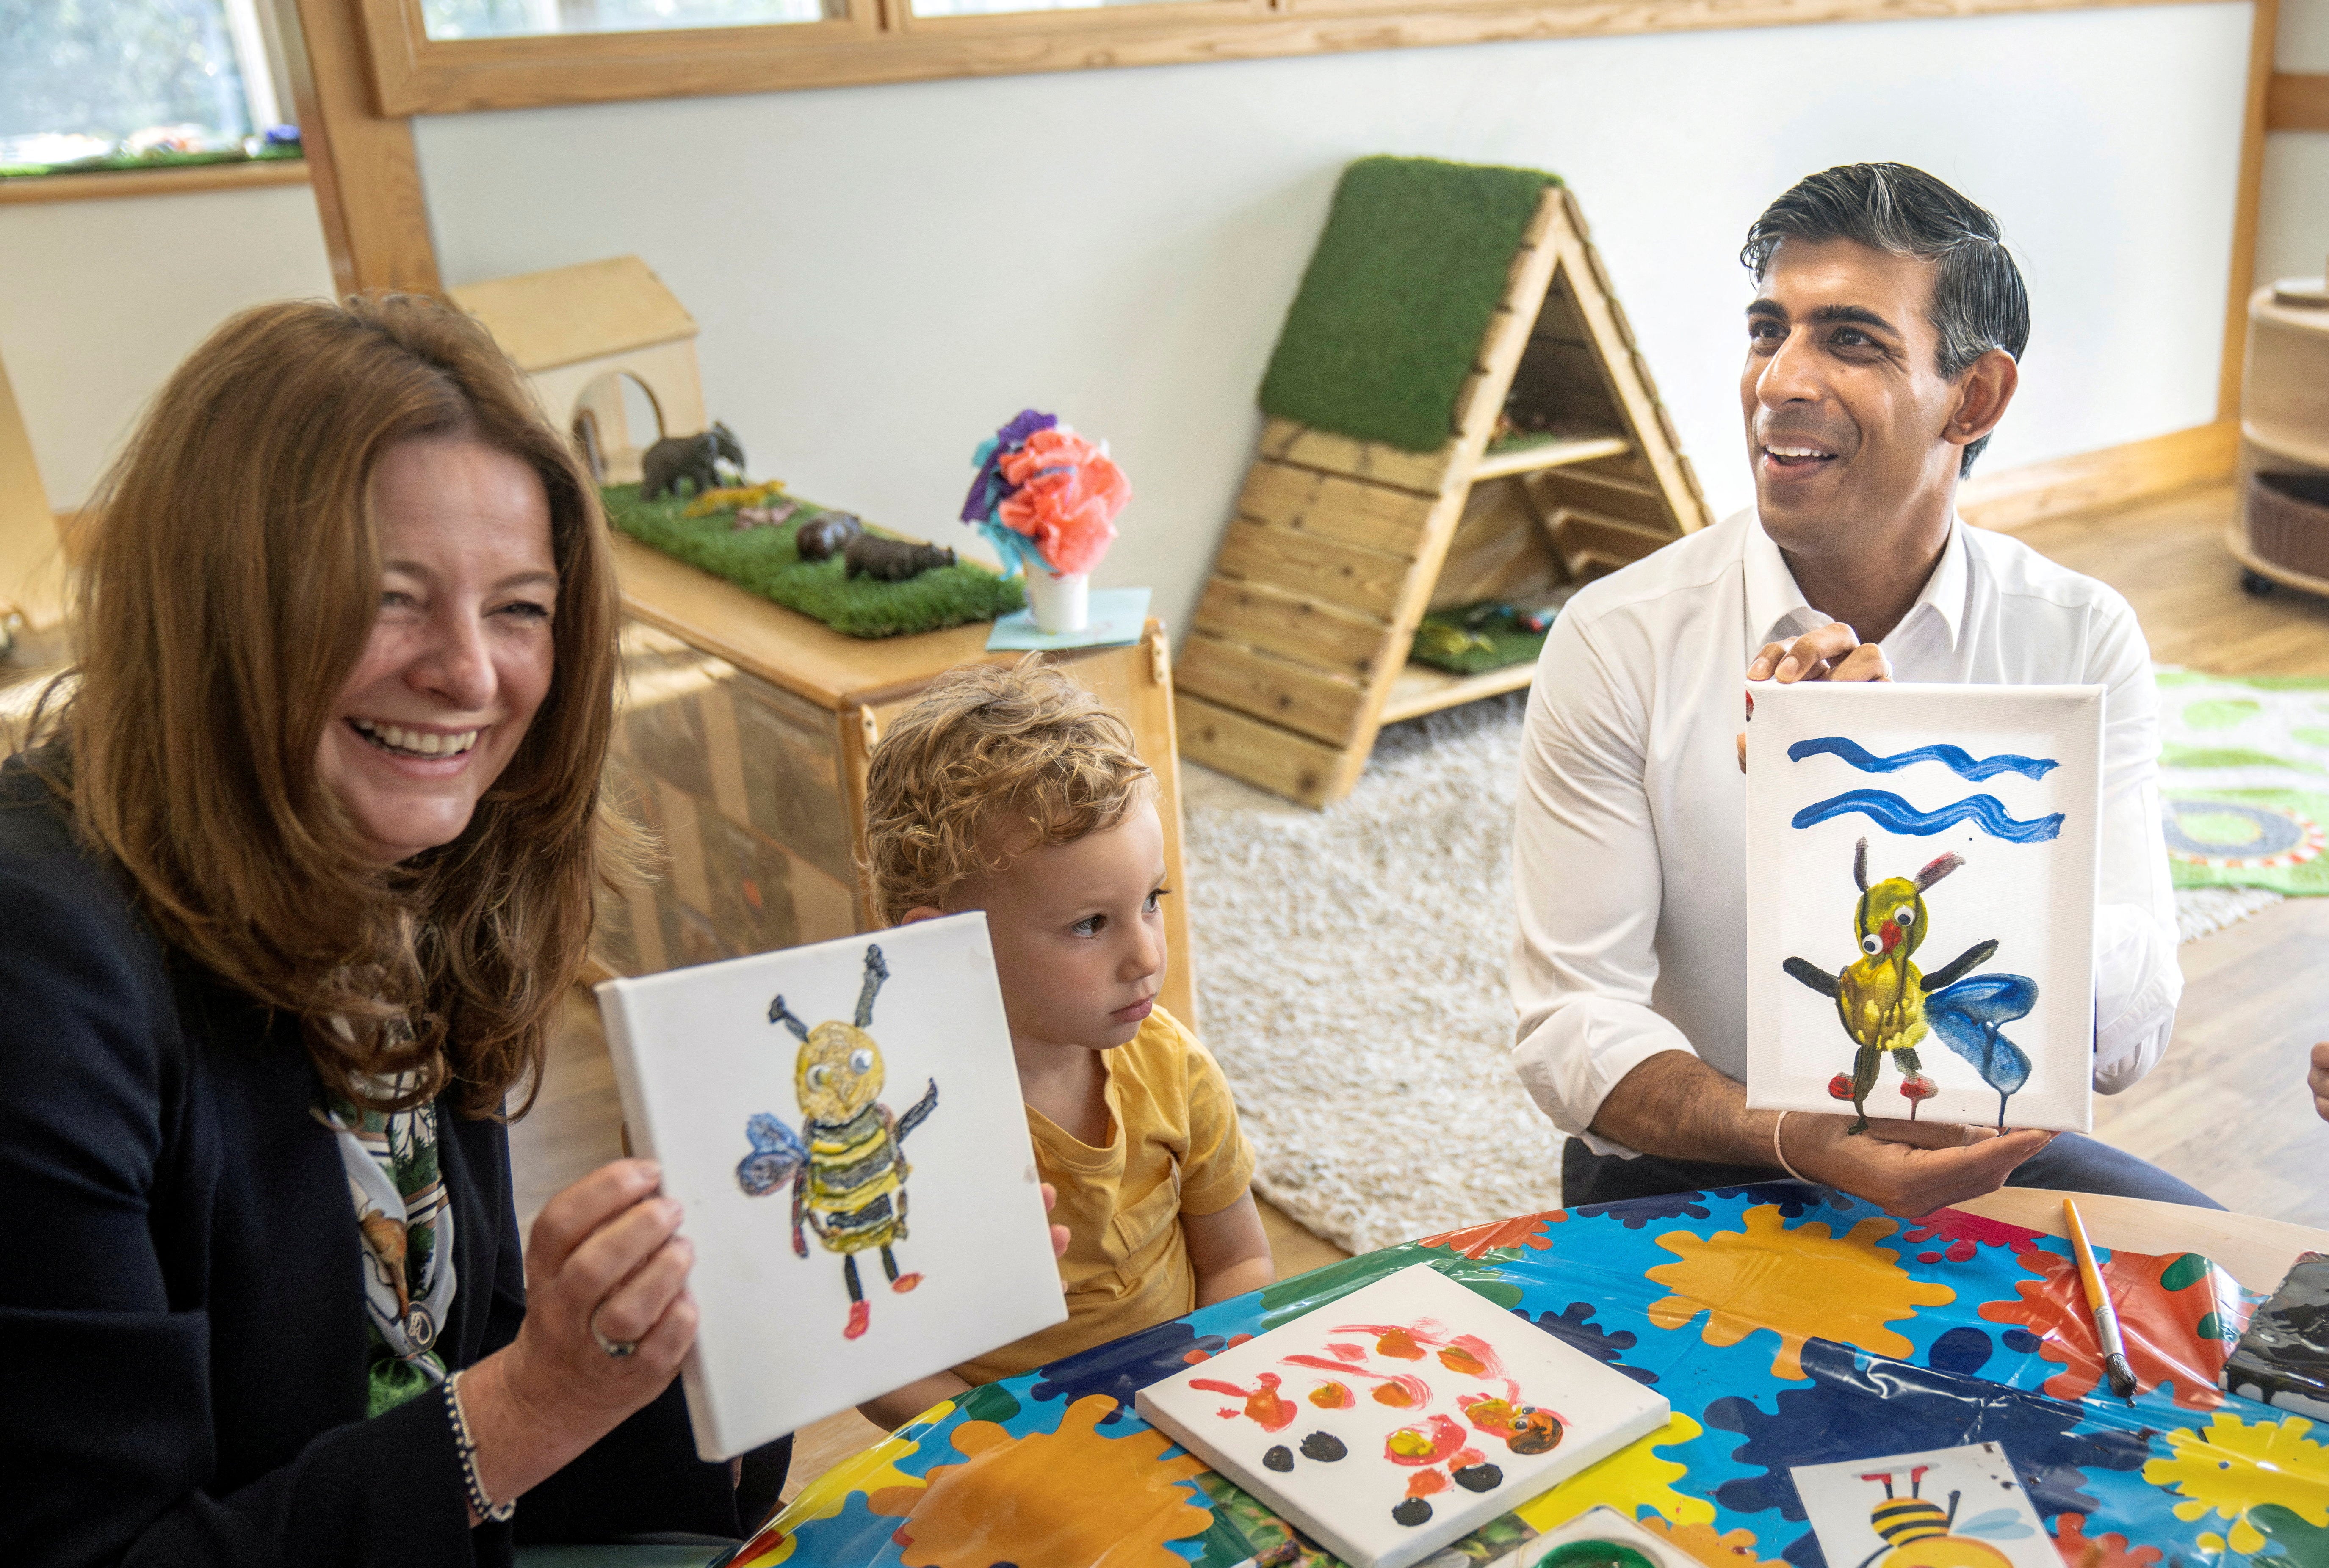 Education secretary Gillian Keegan with prime minister Rishi Sunak at the Busy Bees nursery in Harrogate, North Yorkshire